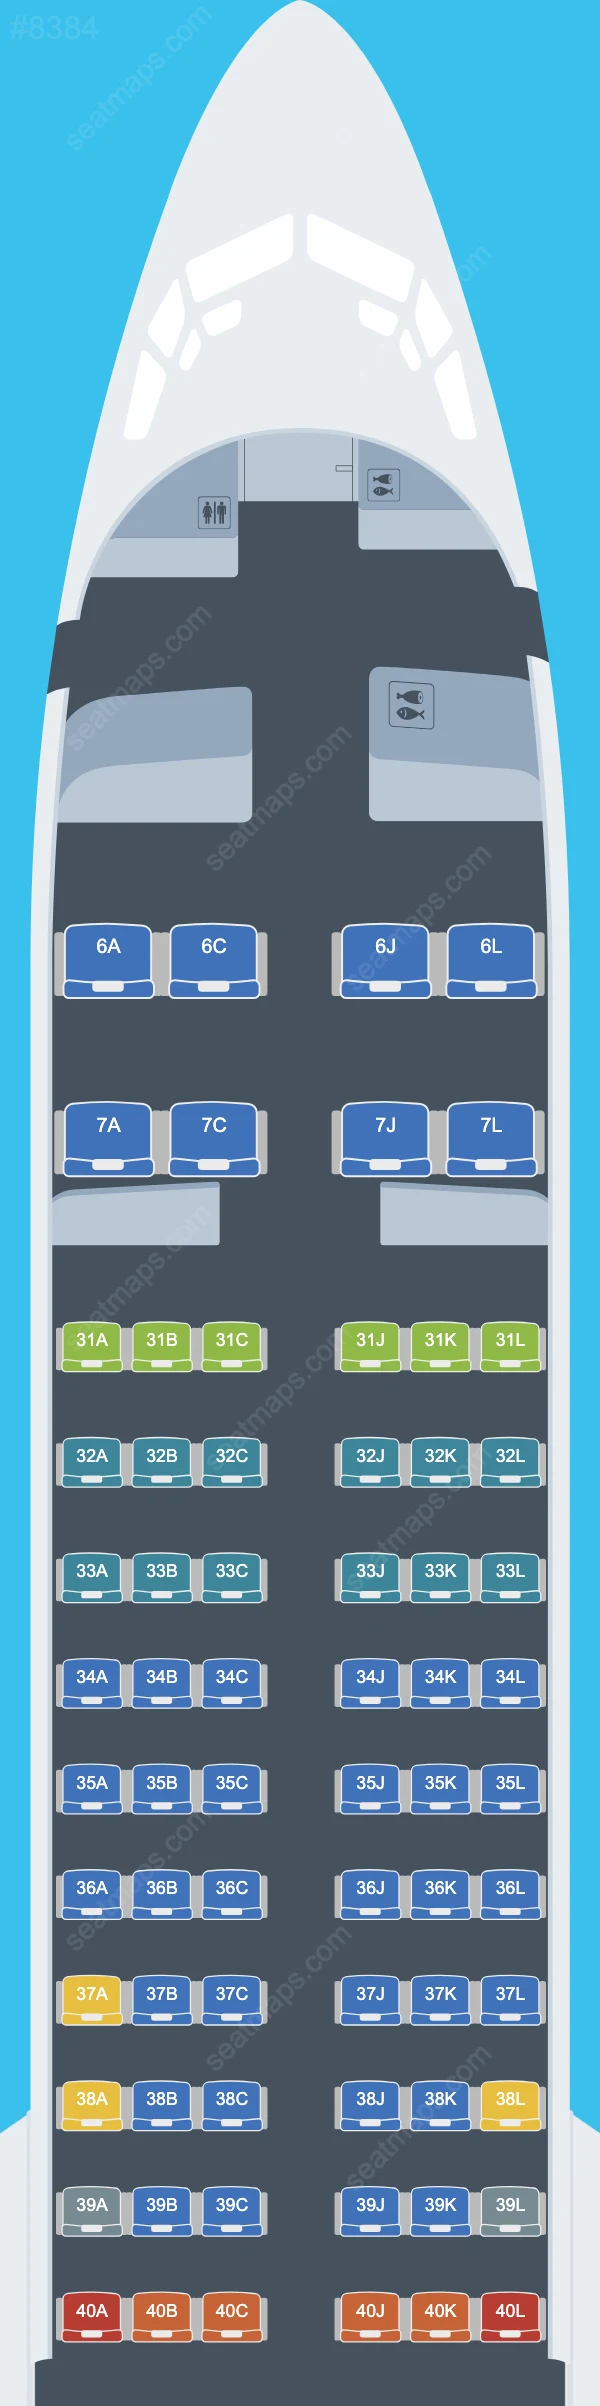 China Eastern Boeing 737 MAX 8 seatmap preview